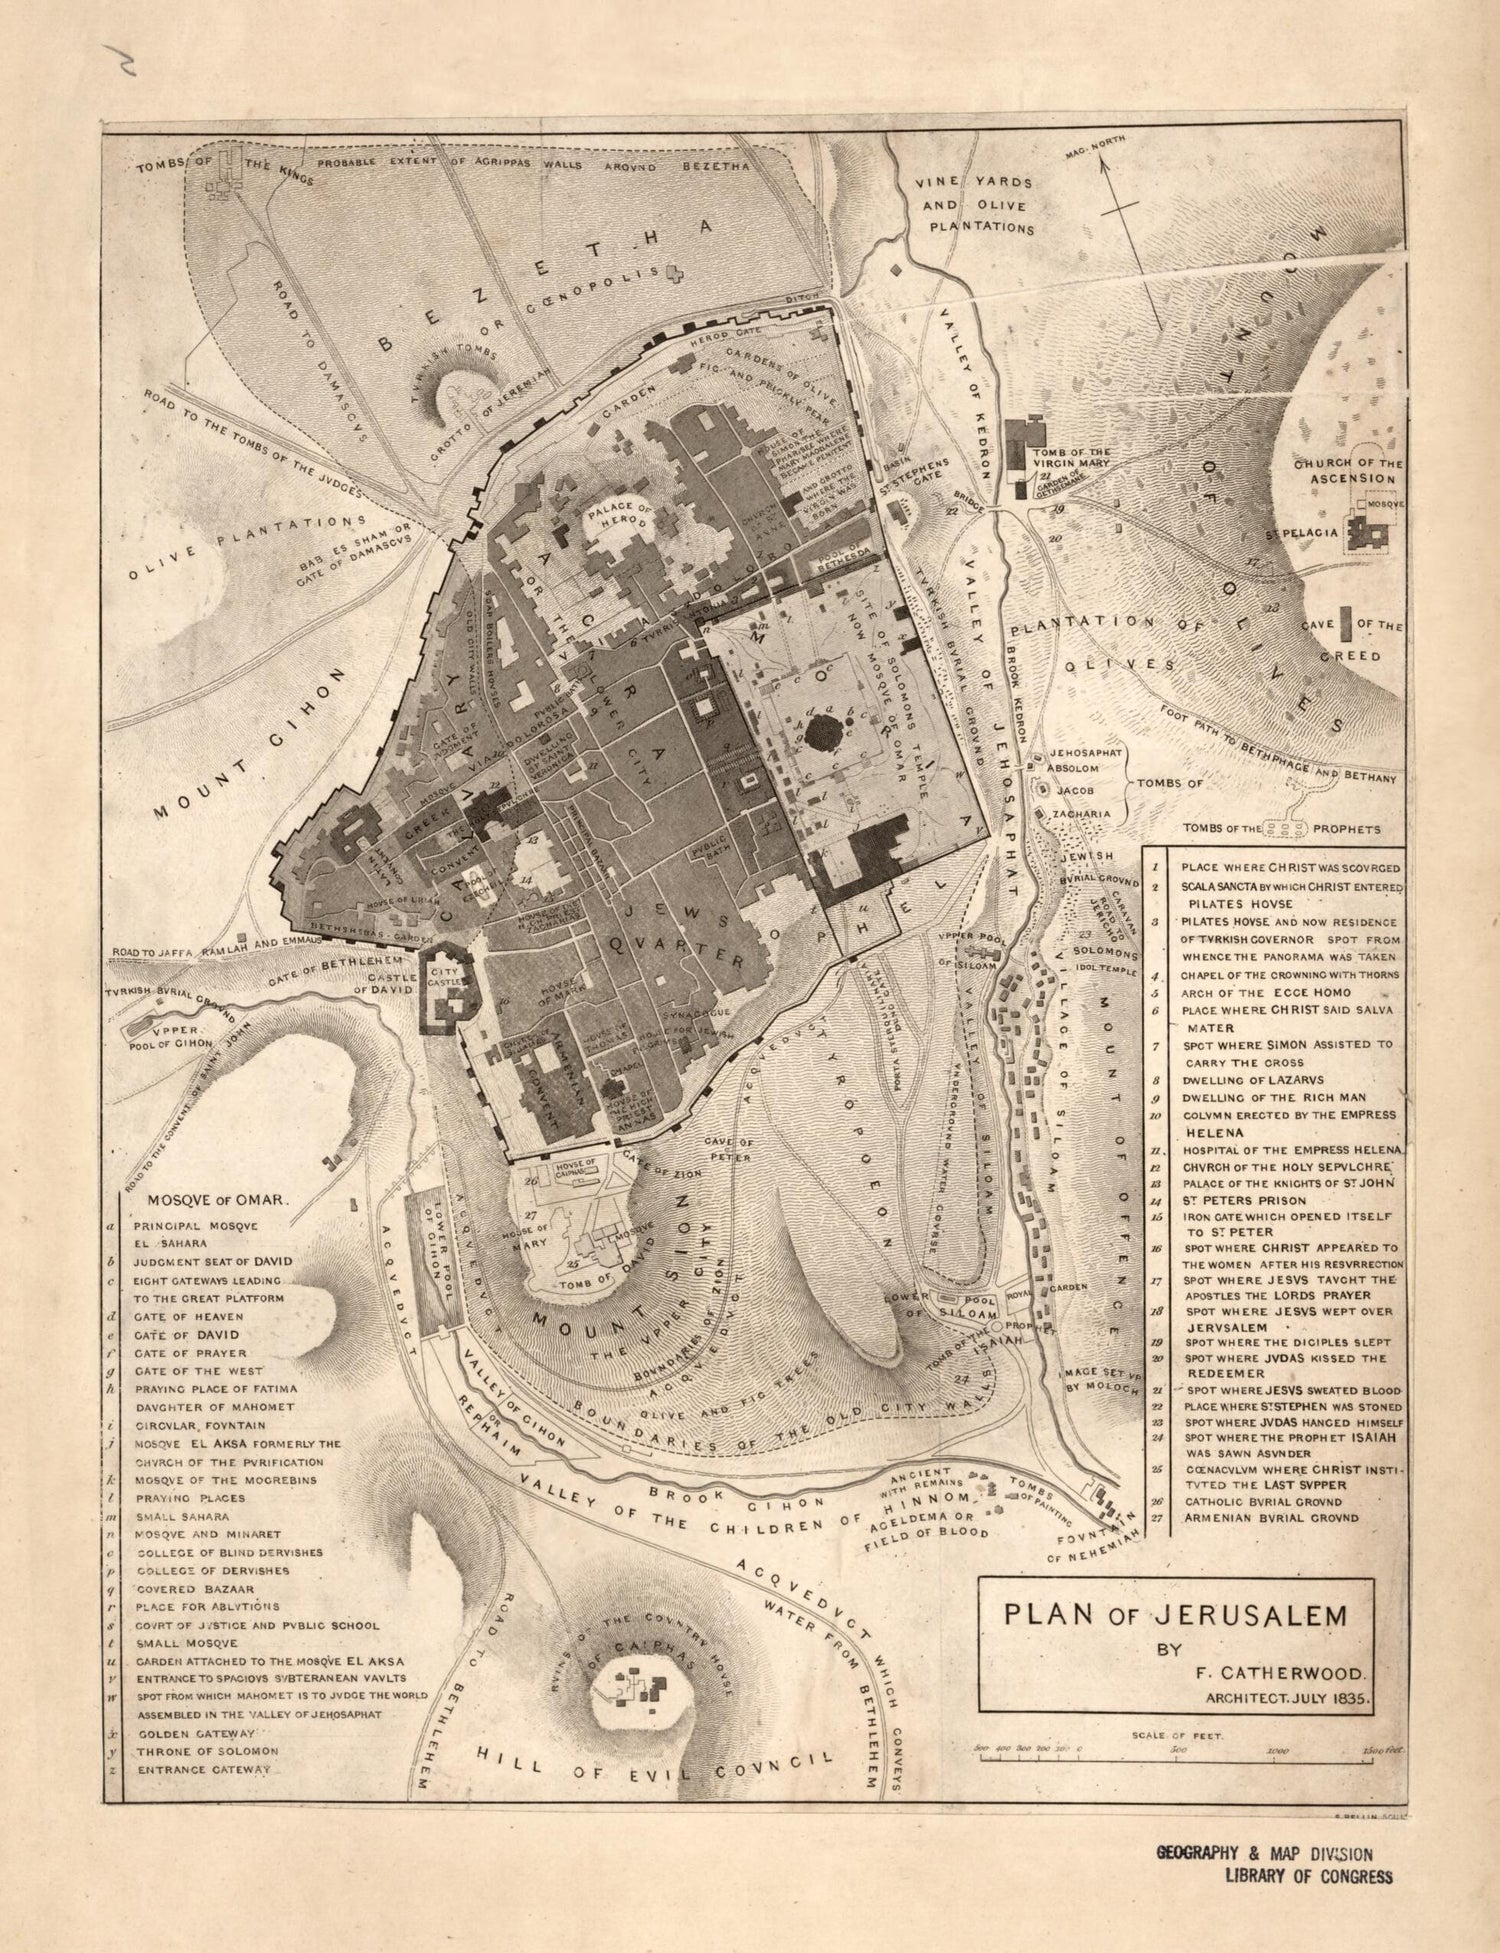 This old map of Plan of Jerusalem from 1835 was created by Samuel Bellin, Frederick Catherwood in 1835